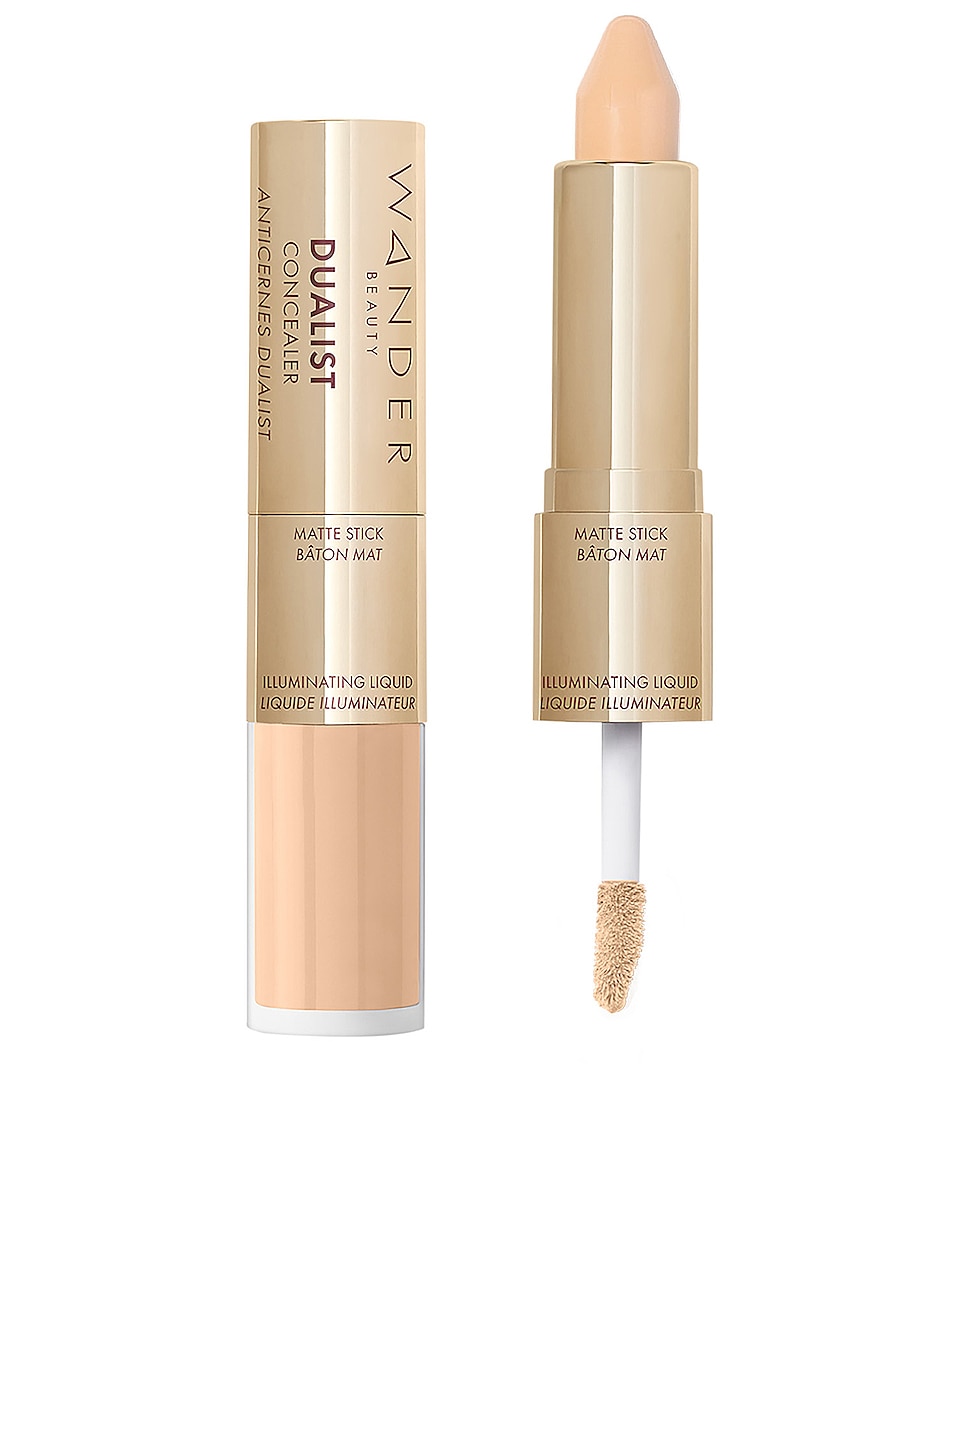 Wander Beauty Dualist Matte and Illuminating Concealer in Fair